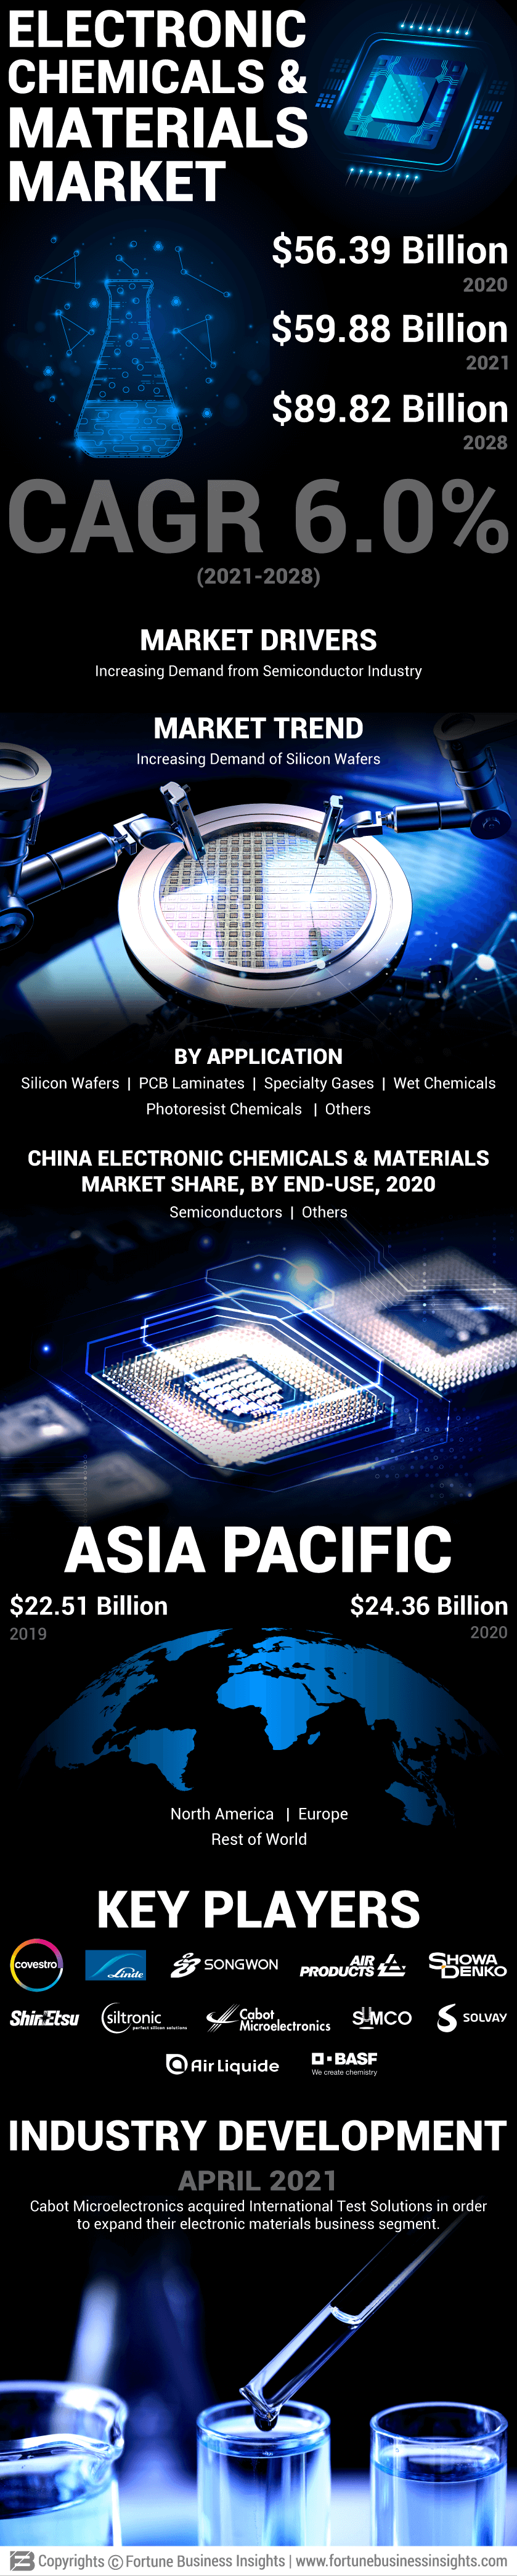 Electronic Chemicals and Materials Market